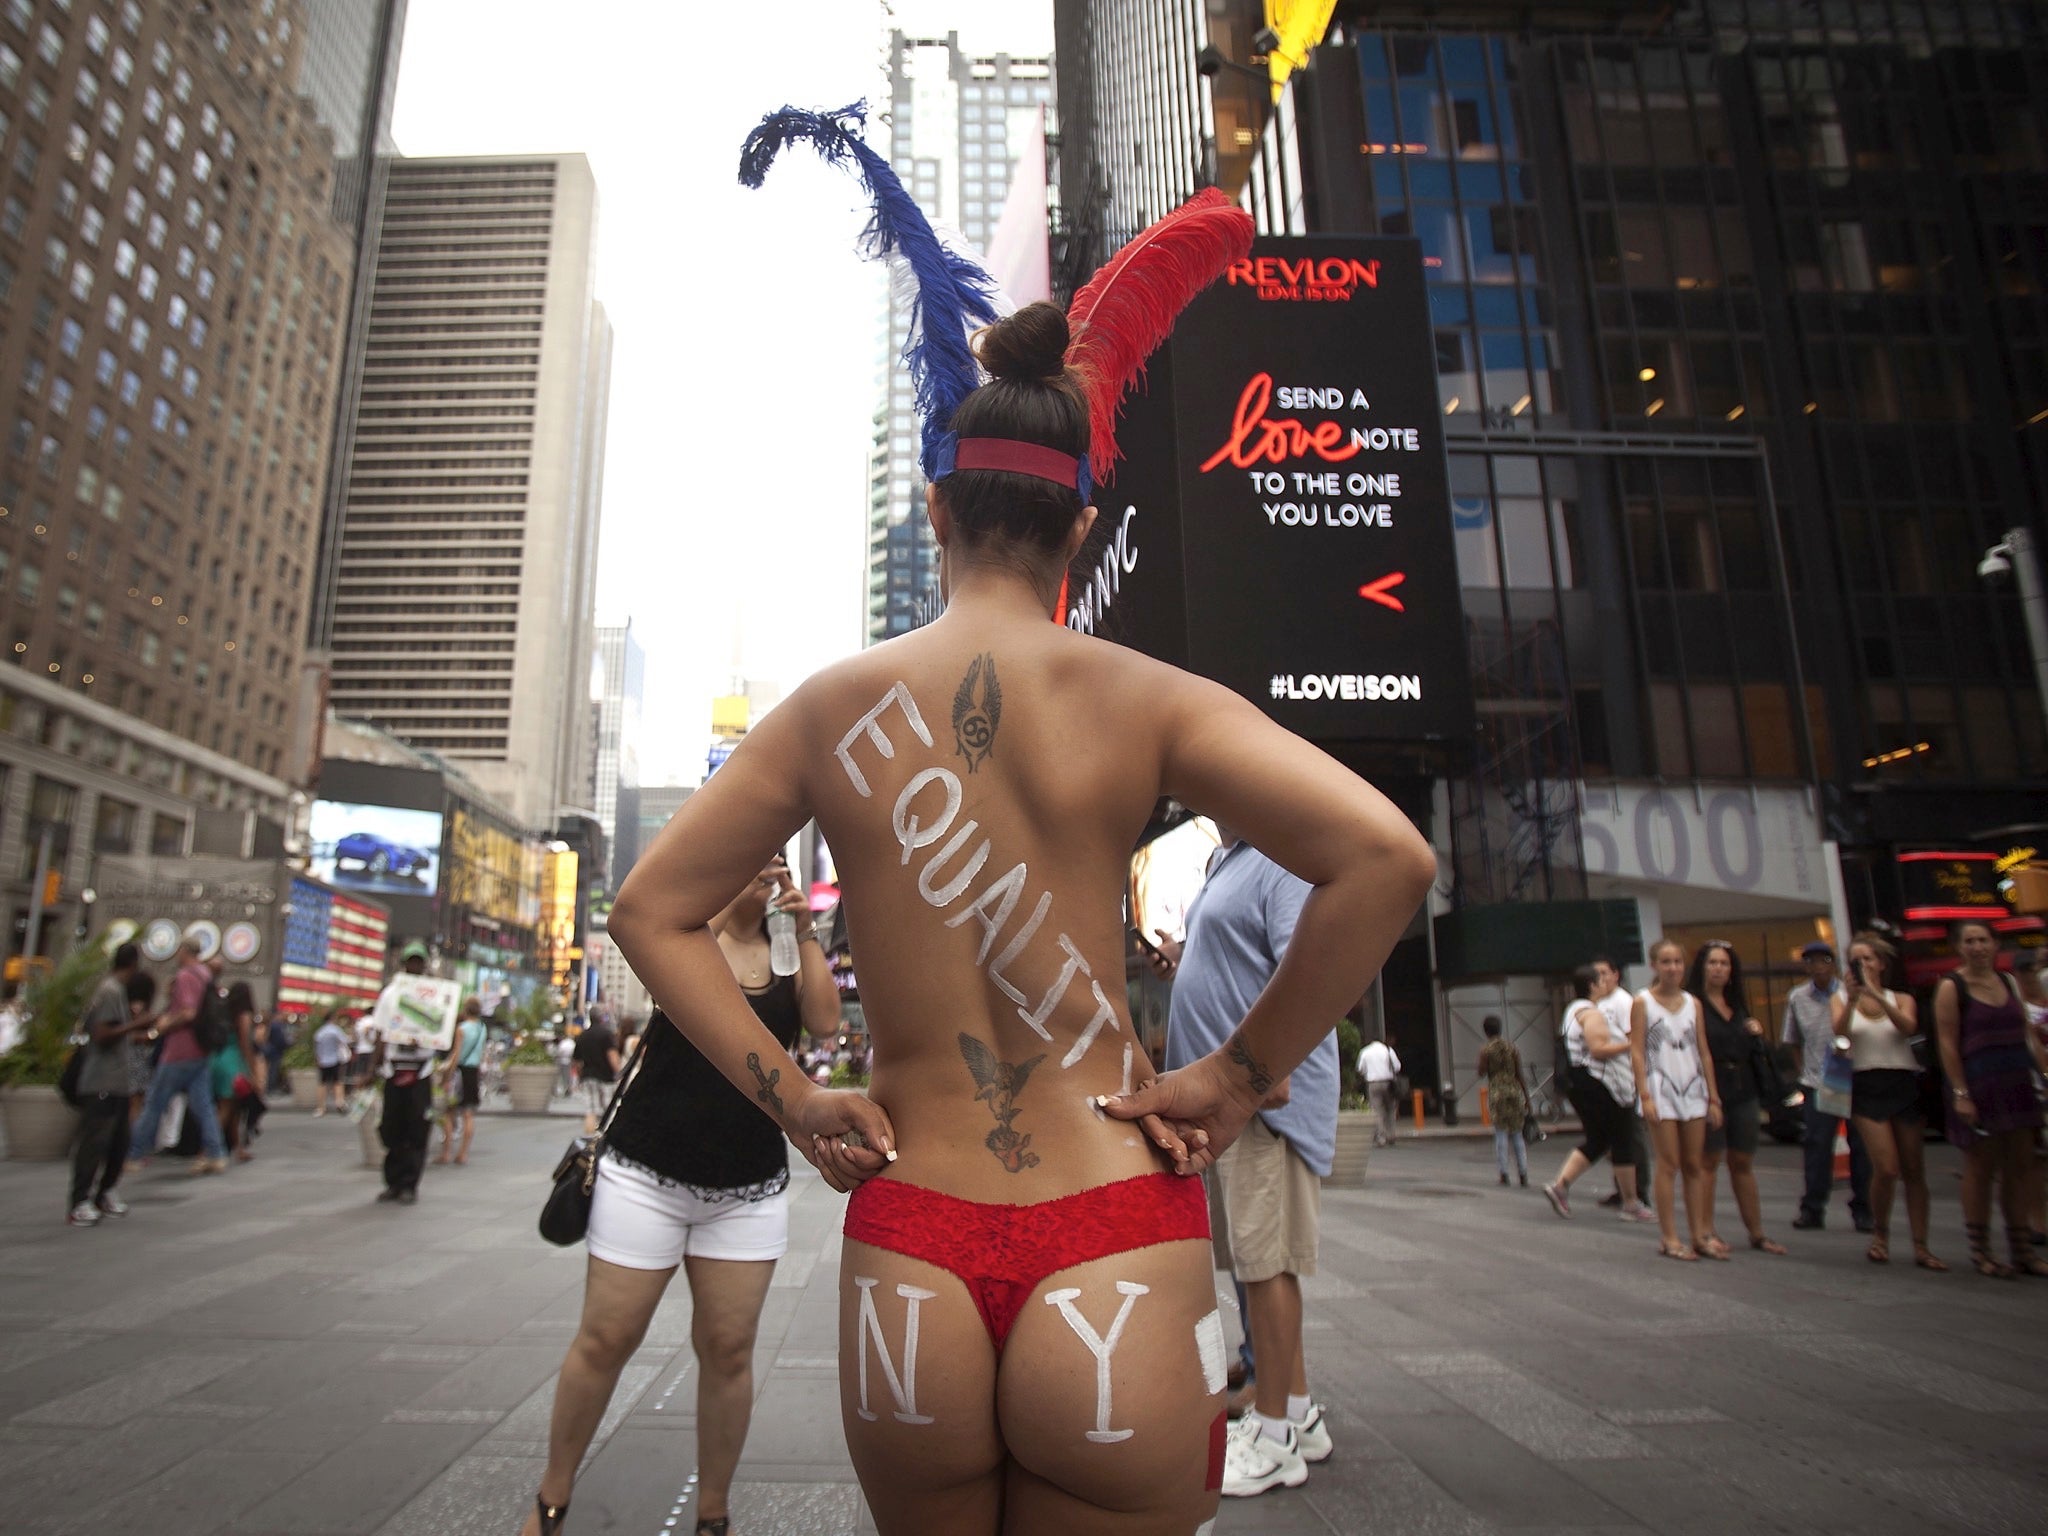 New York's mayor has promised a crackdown against the 'painted ladies' of Times Square